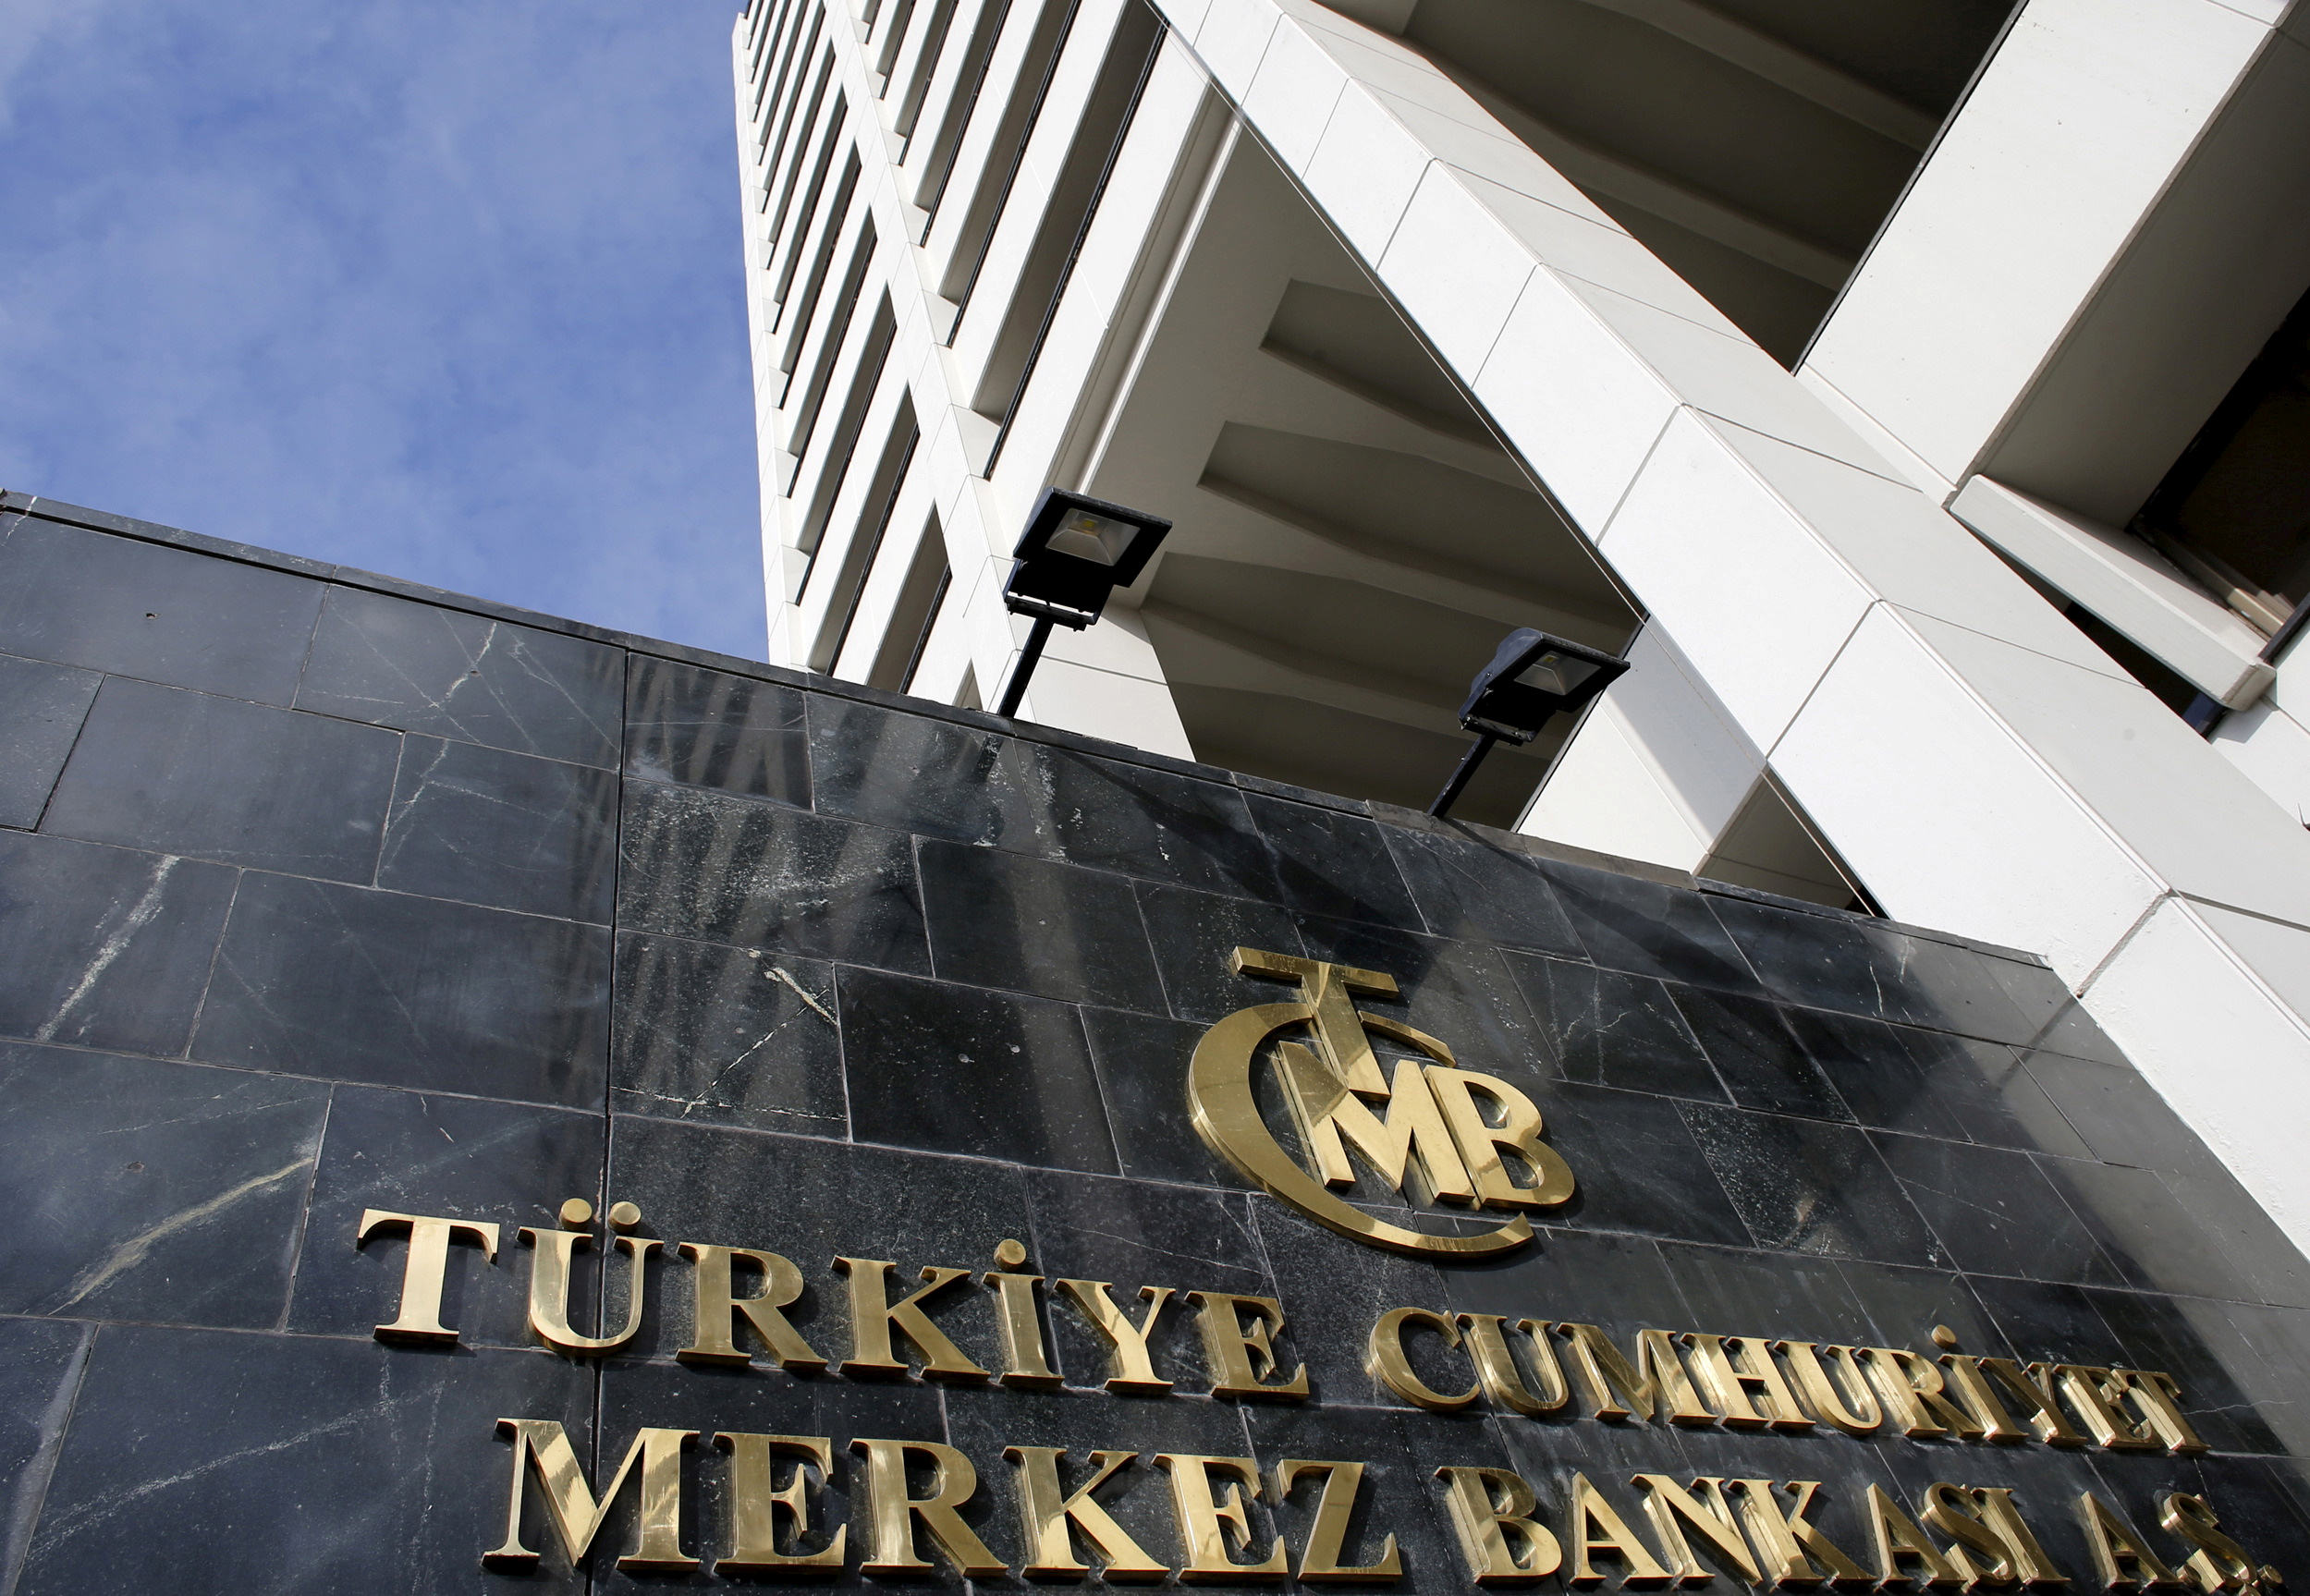 Turkey's Central Bank headquarters is seen in Ankara, Turkey in this January 24, 2014 file photo. REUTERS/Umit Bektas//File Photo